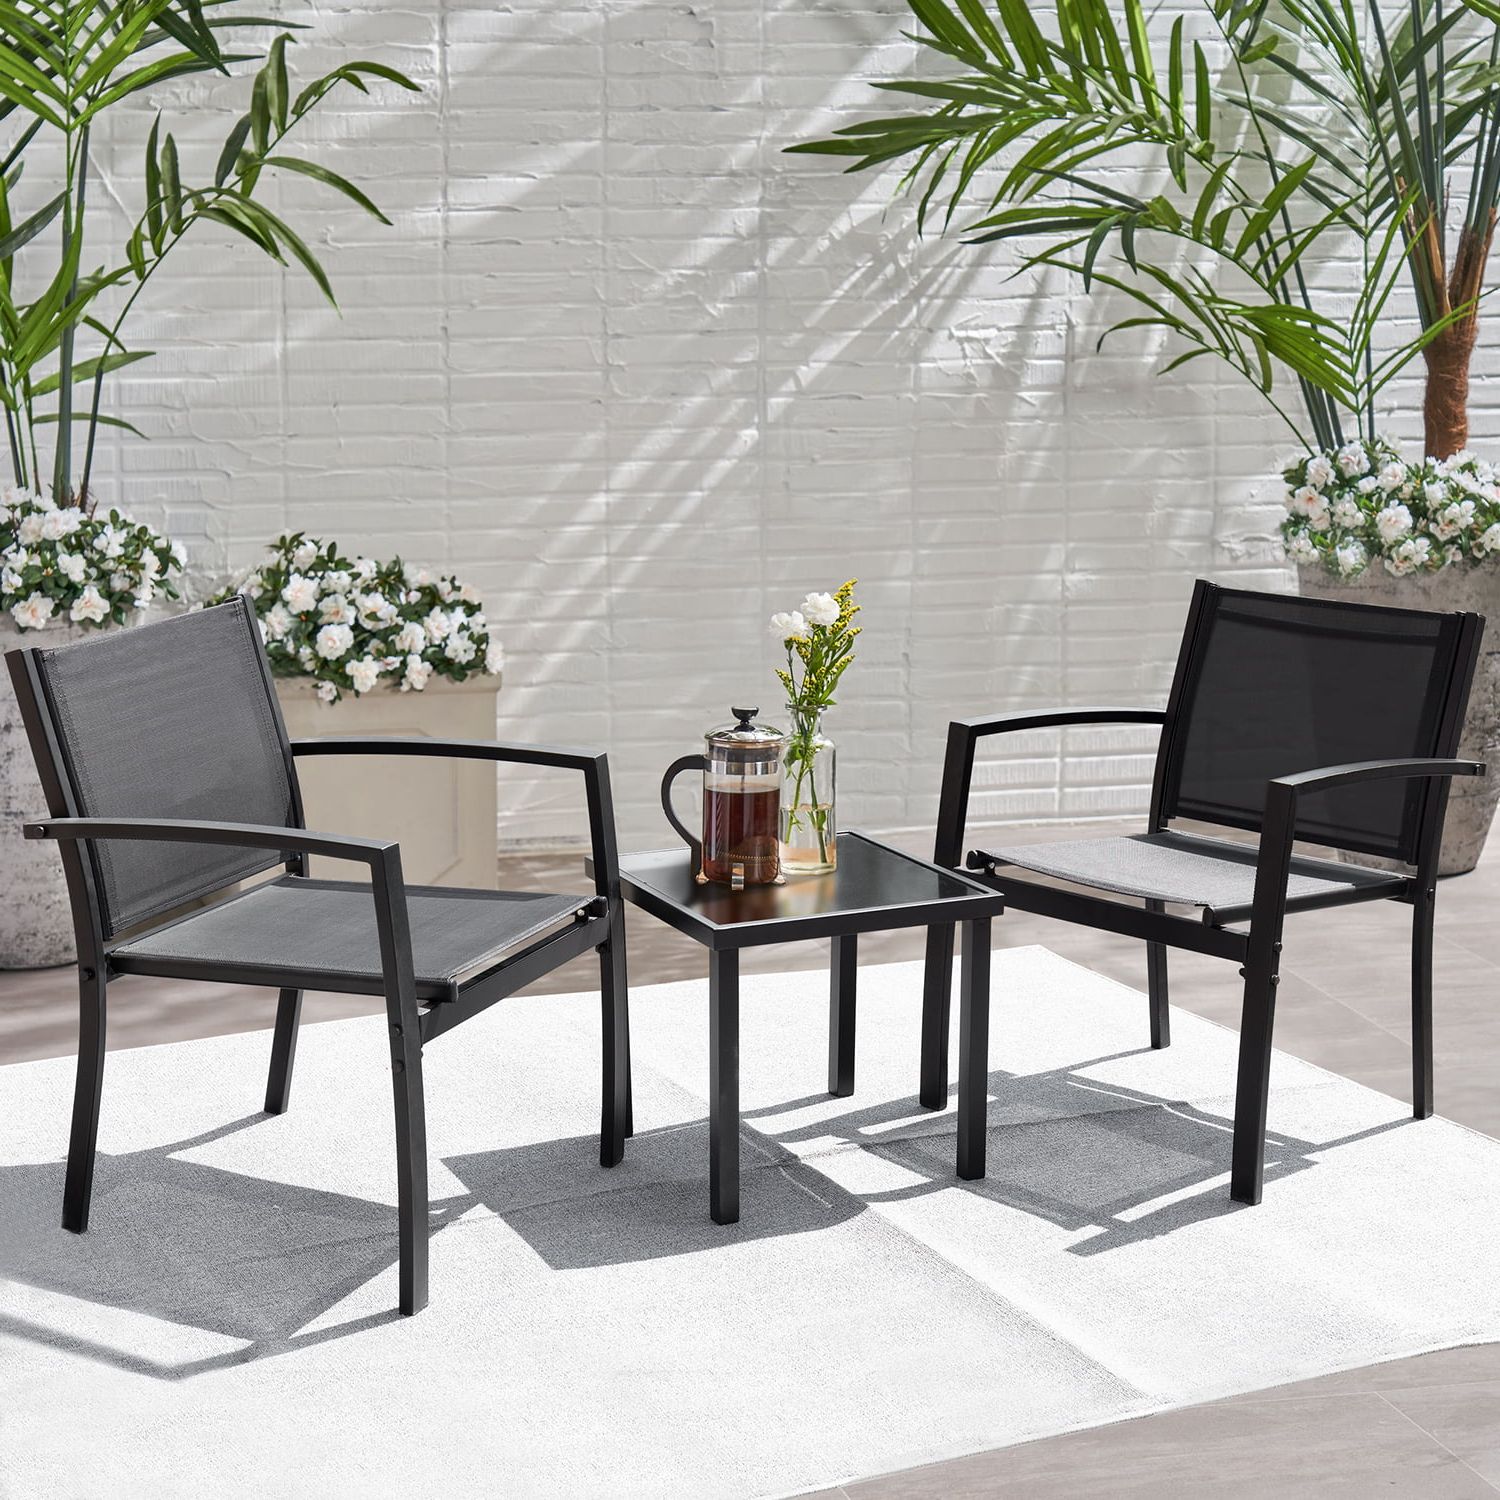 Lacoo 3 Pieces Patio Conversation Set Bistro Set Morden Furniture Set With  Table, Balck,textilene Fabric & Steel Frame – Walmart Intended For Well Known Textilene Bistro Set Modern Conversation Set (View 10 of 15)